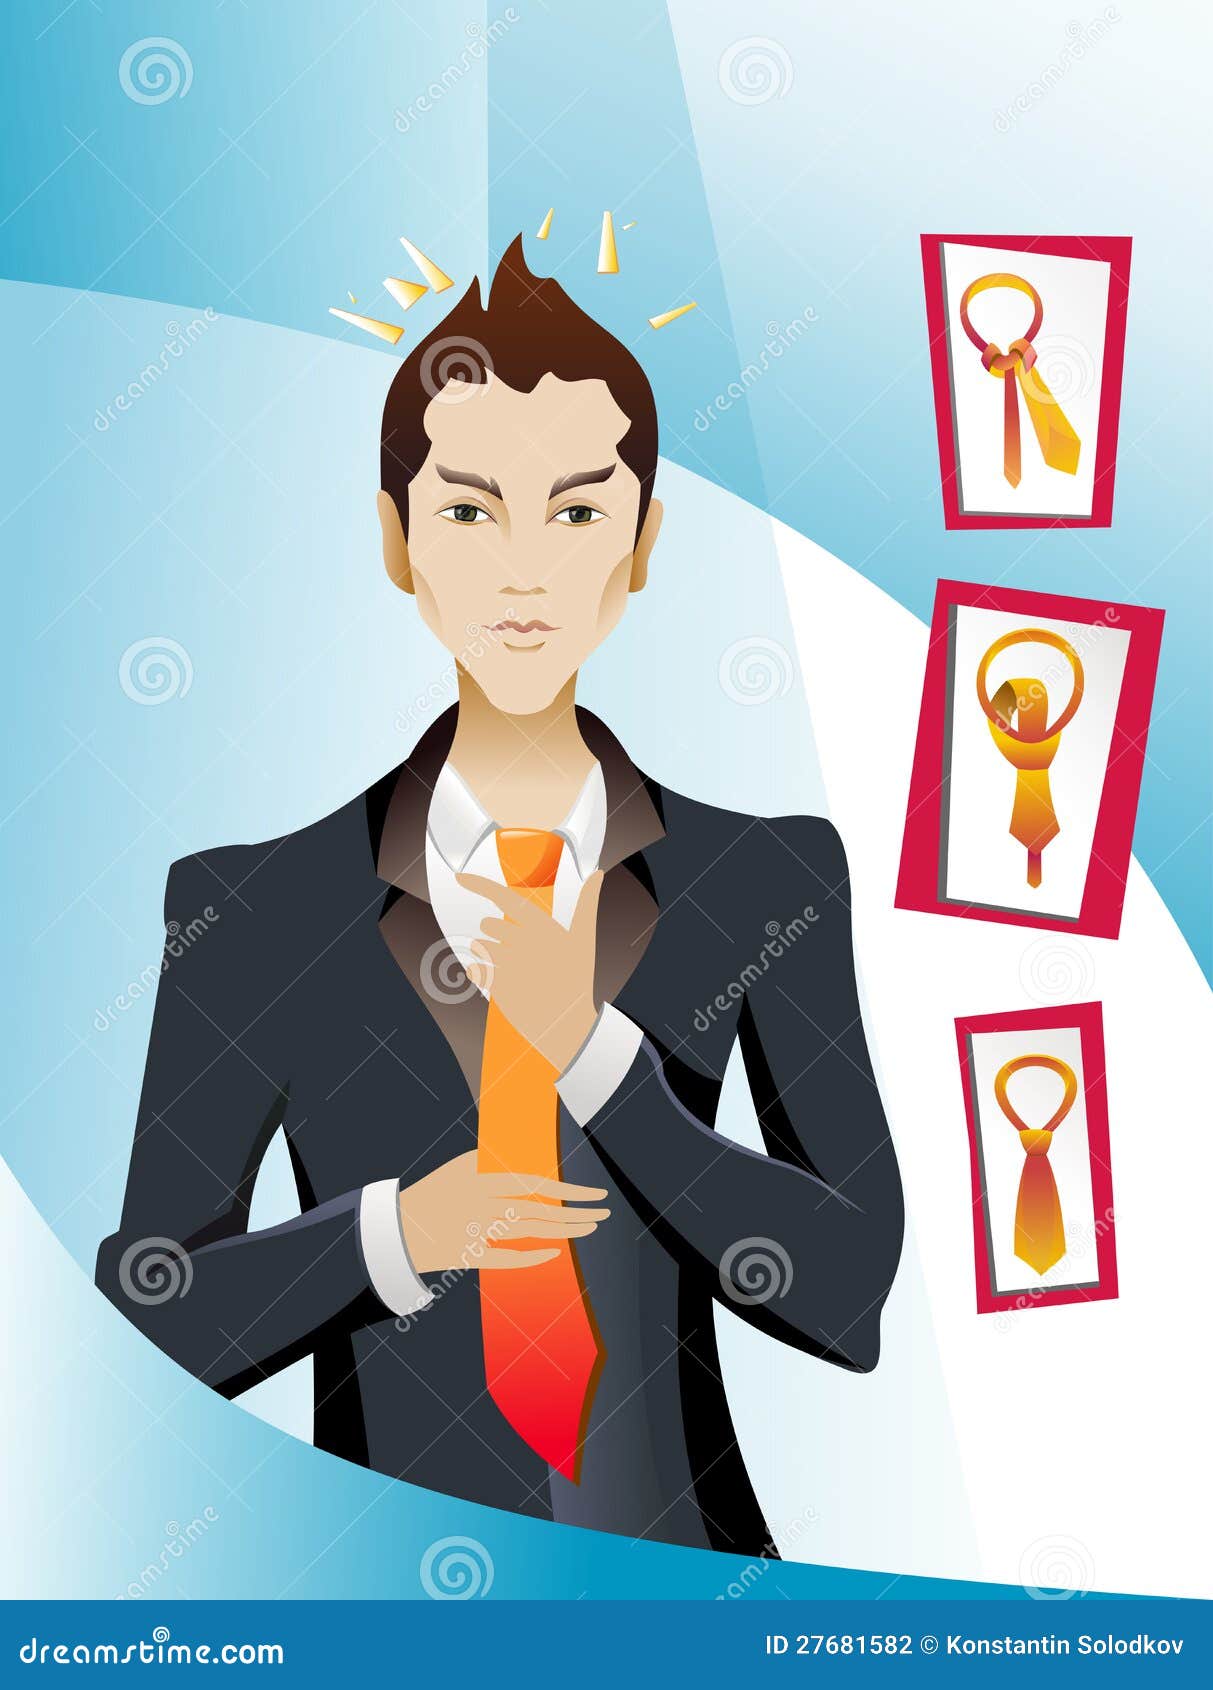 Office Worker stock vector. Illustration of fashion, beauty - 27681582